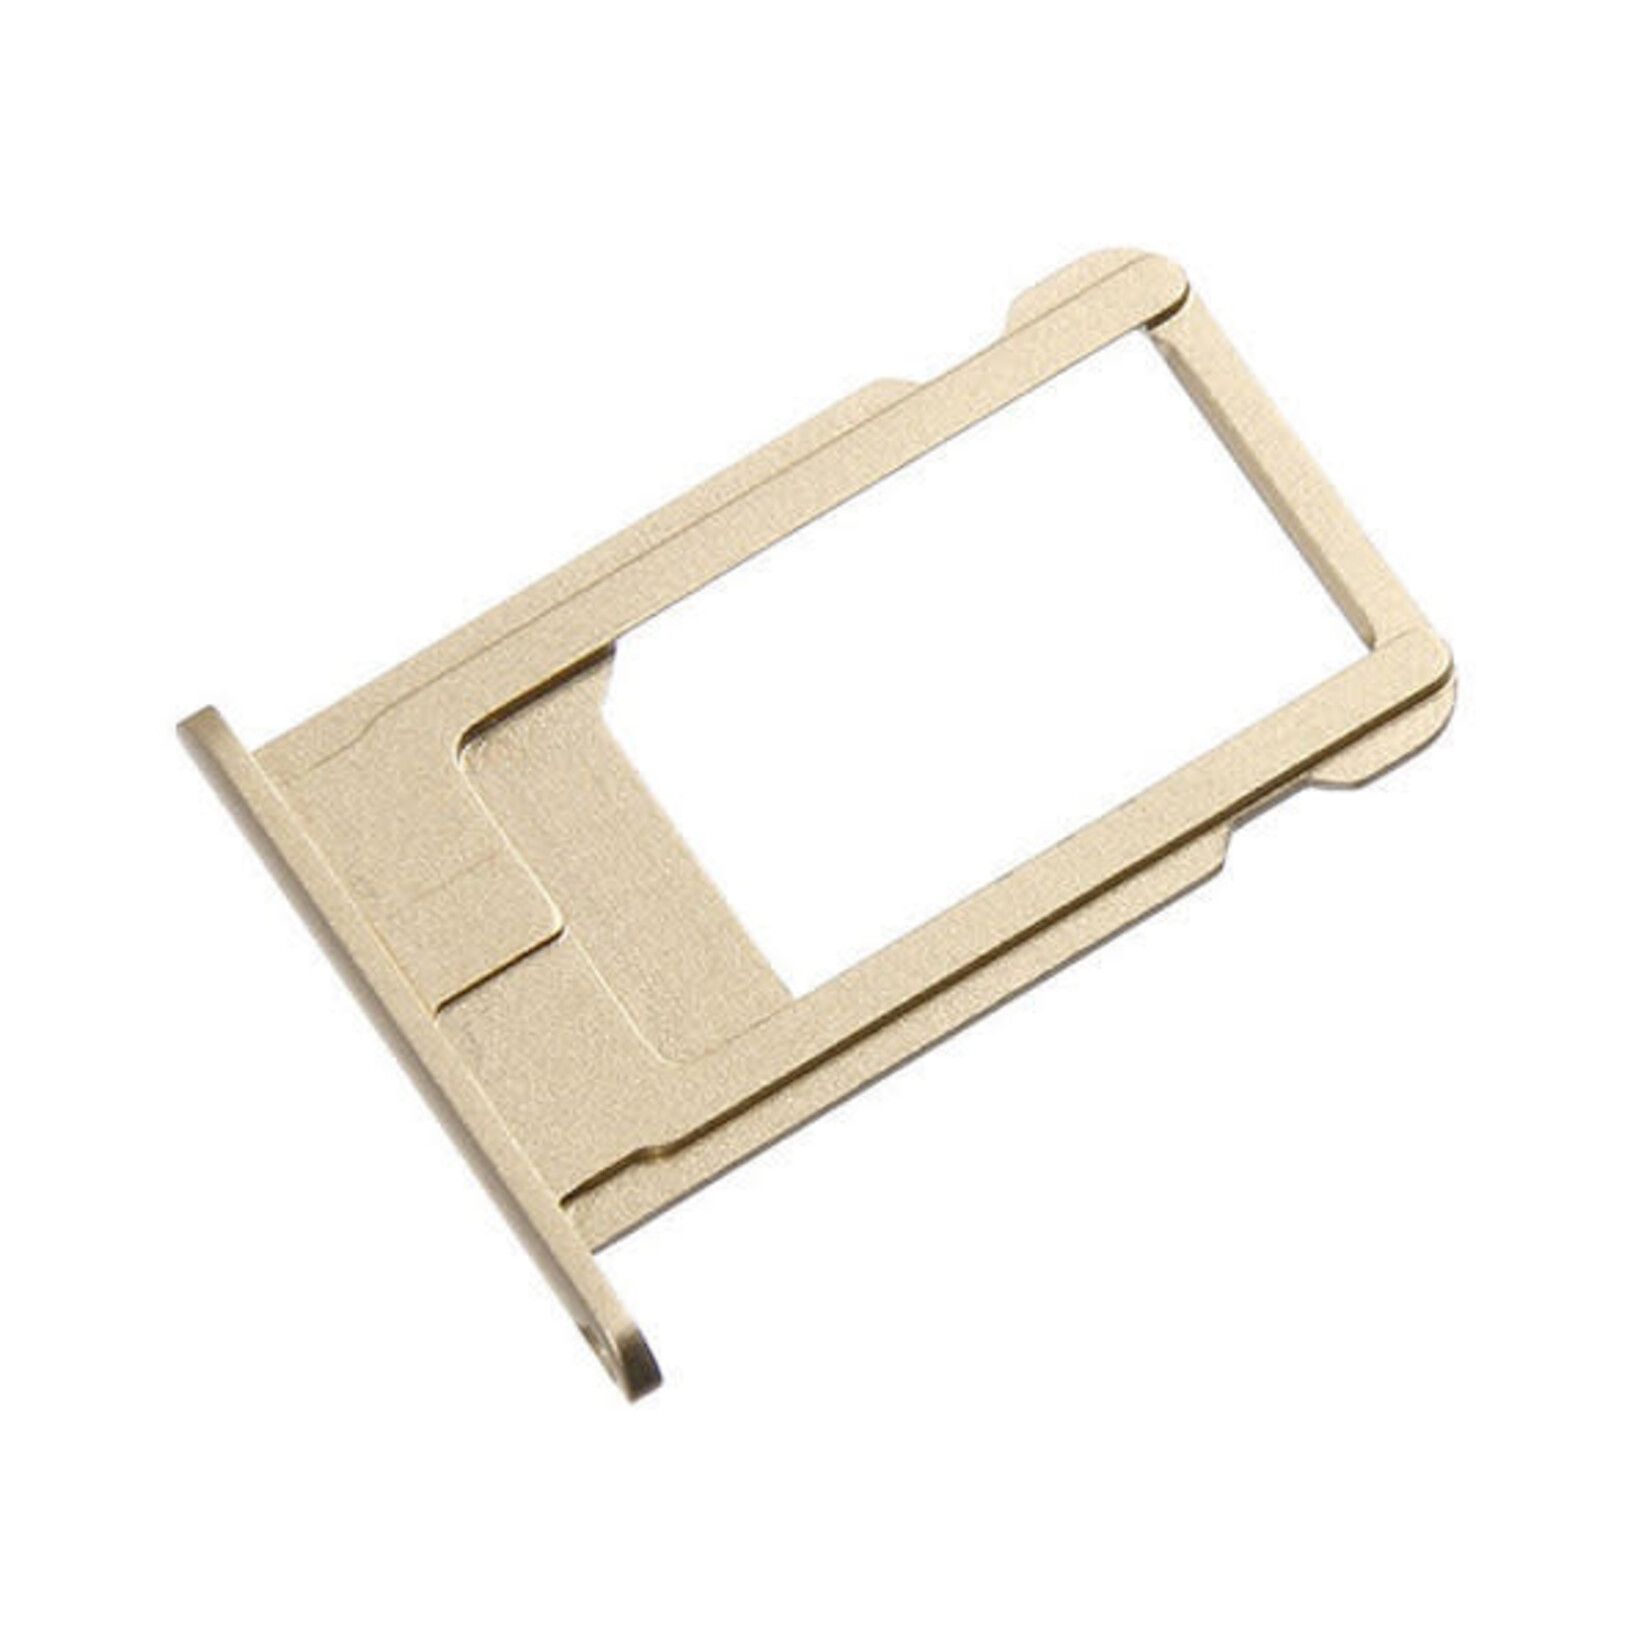 Apple SIM TRAY POUR IPHONE 6 OR GOLD